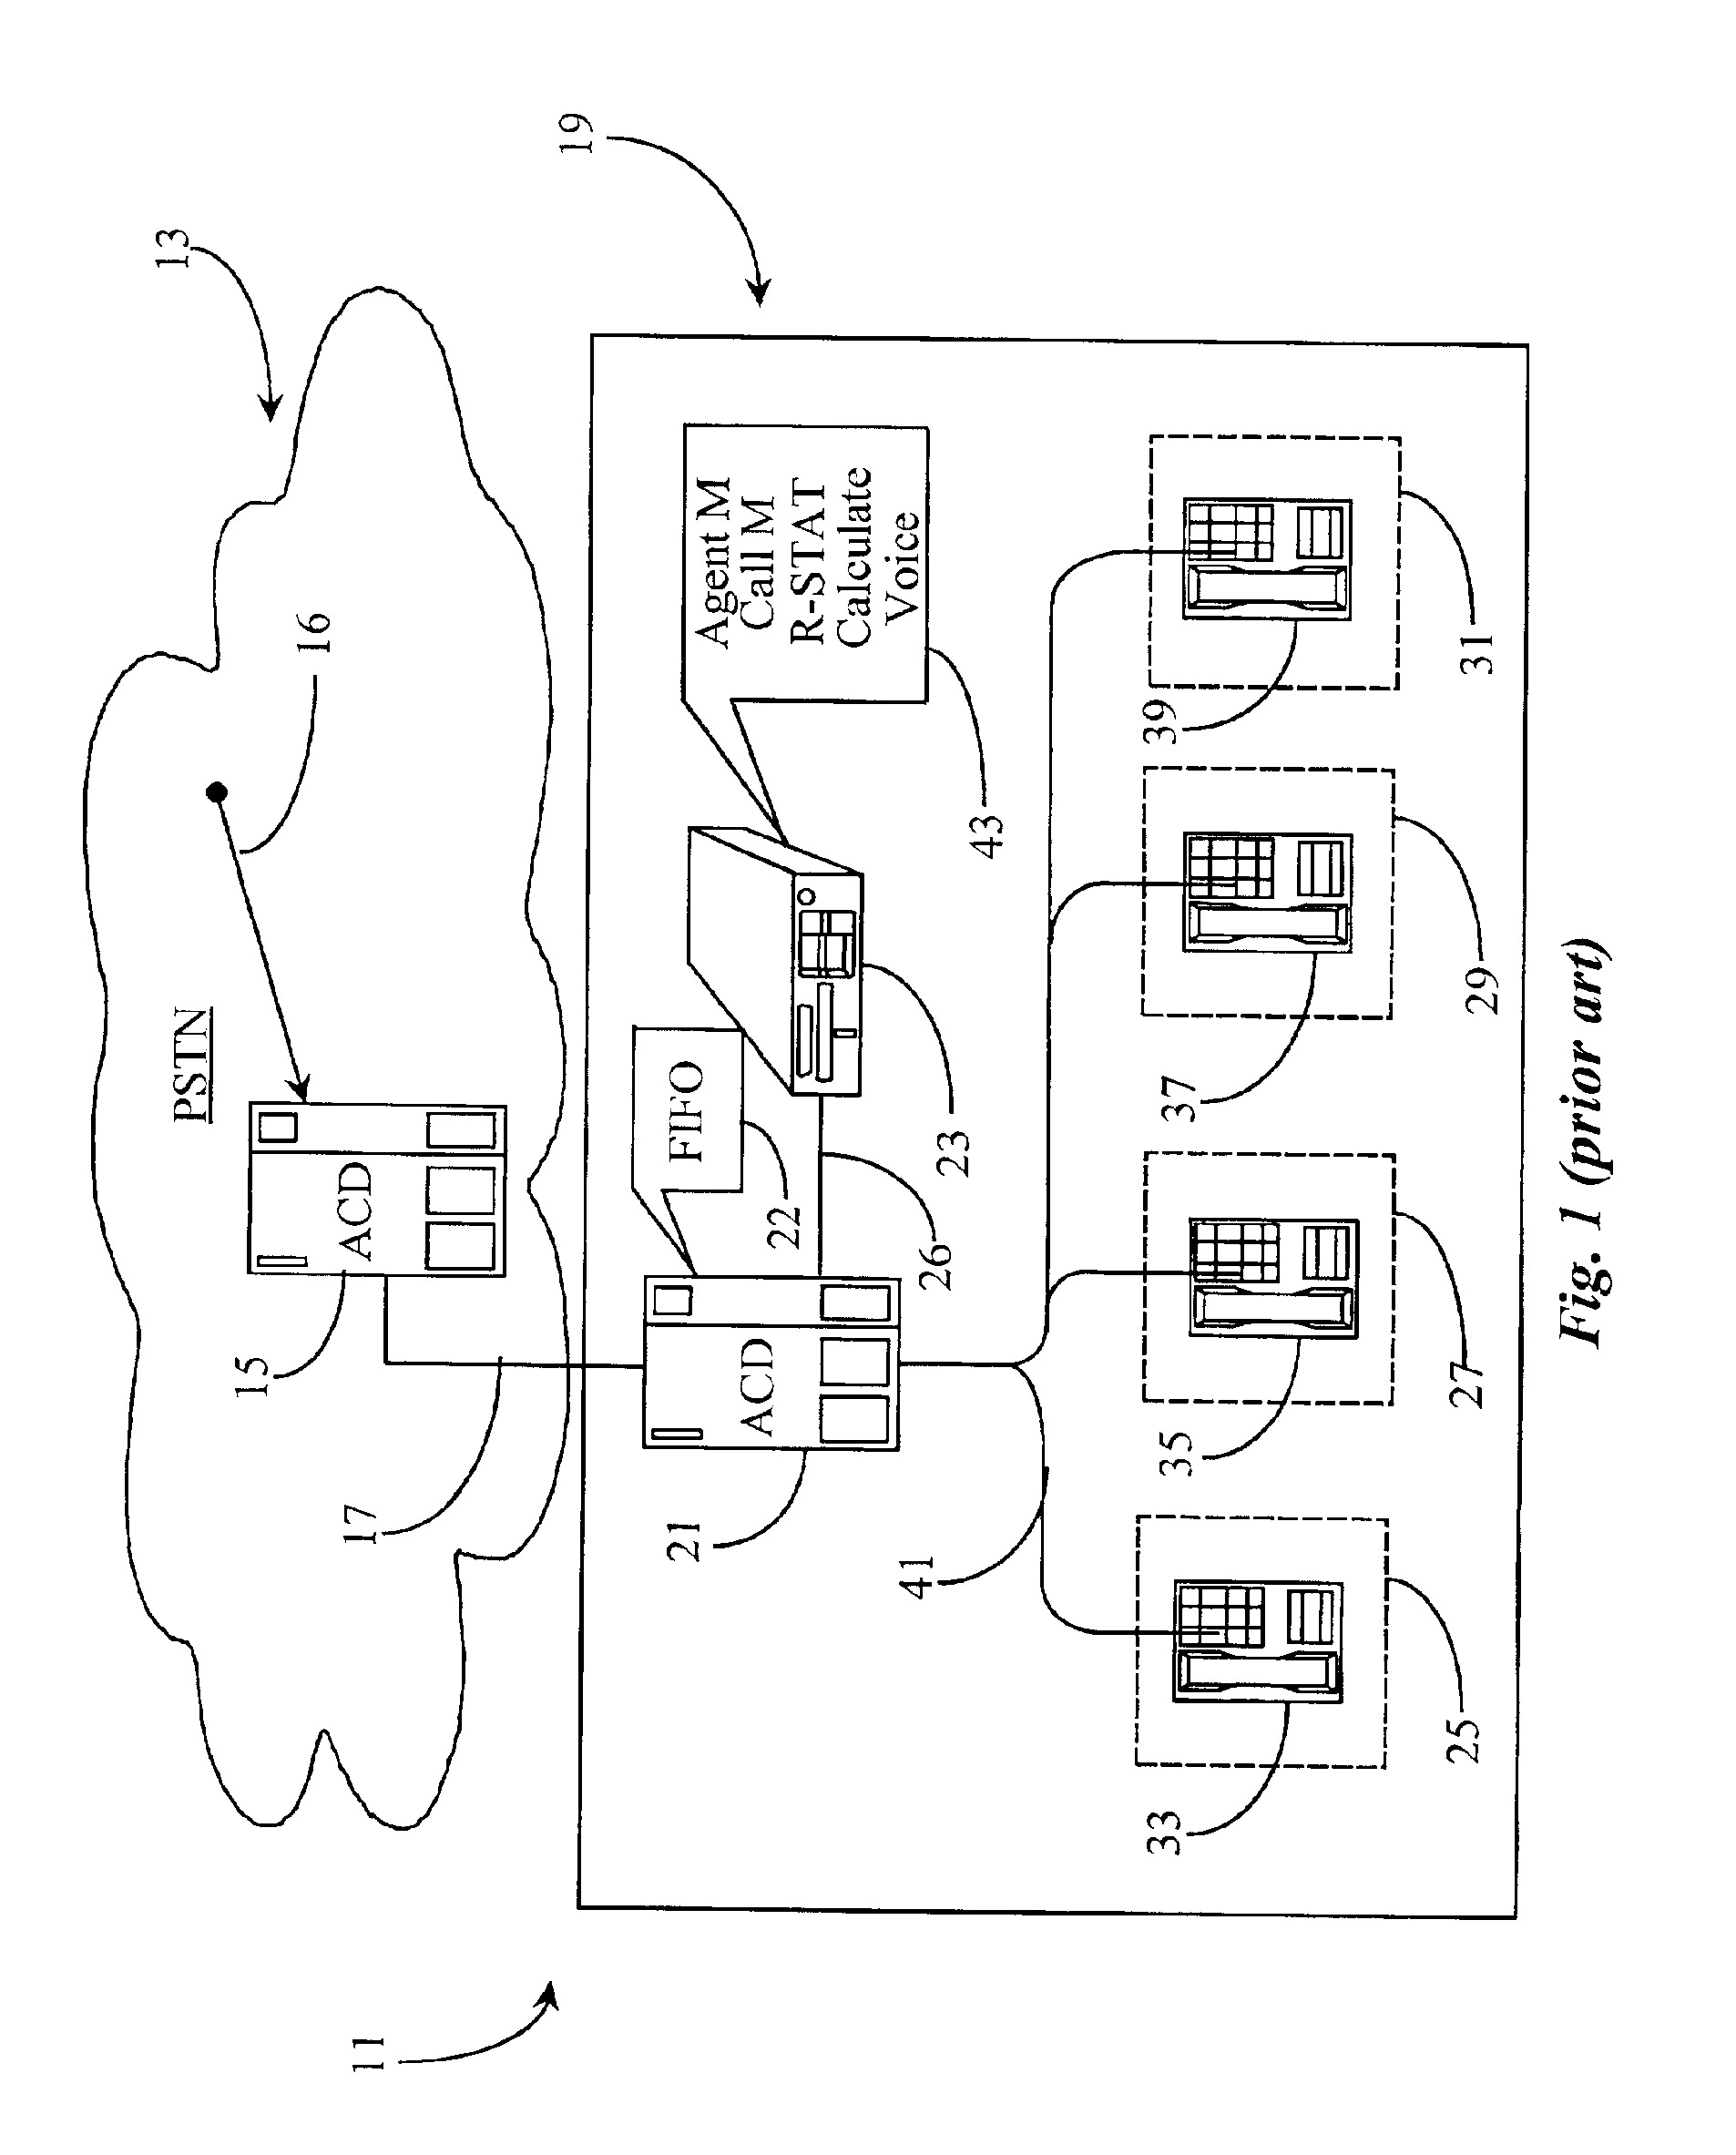 Method for estimating telephony system-queue waiting time in an agent level routing environment